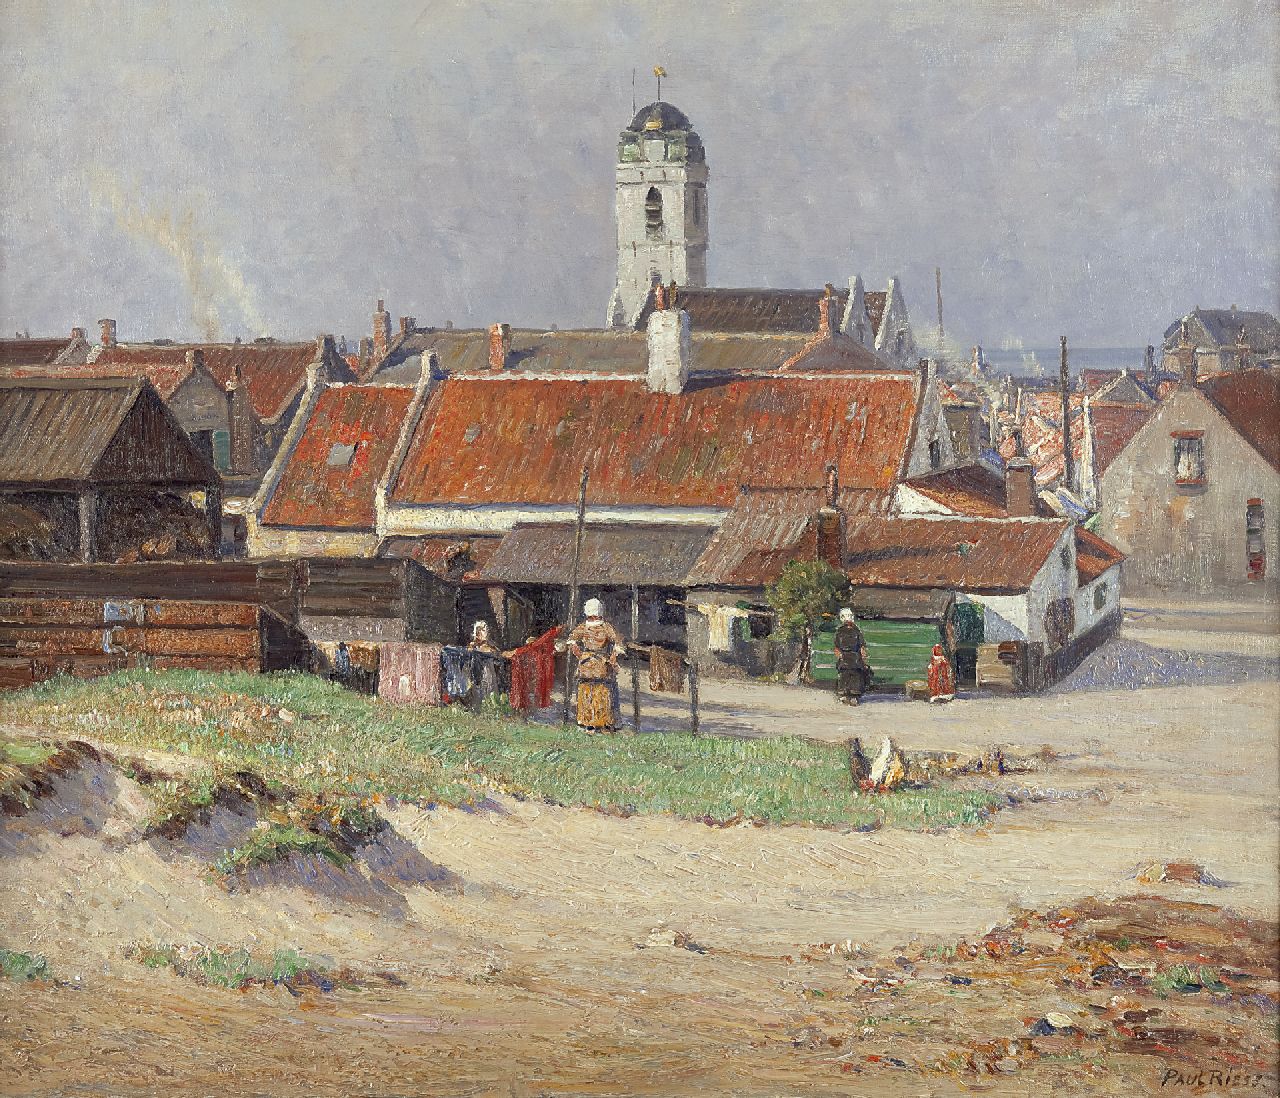 Paul Riess | A View of Katwijk aan Zee with the Oude Kerk, Öl auf Leinwand, 60,9 x 70,6 cm, signed l.r.